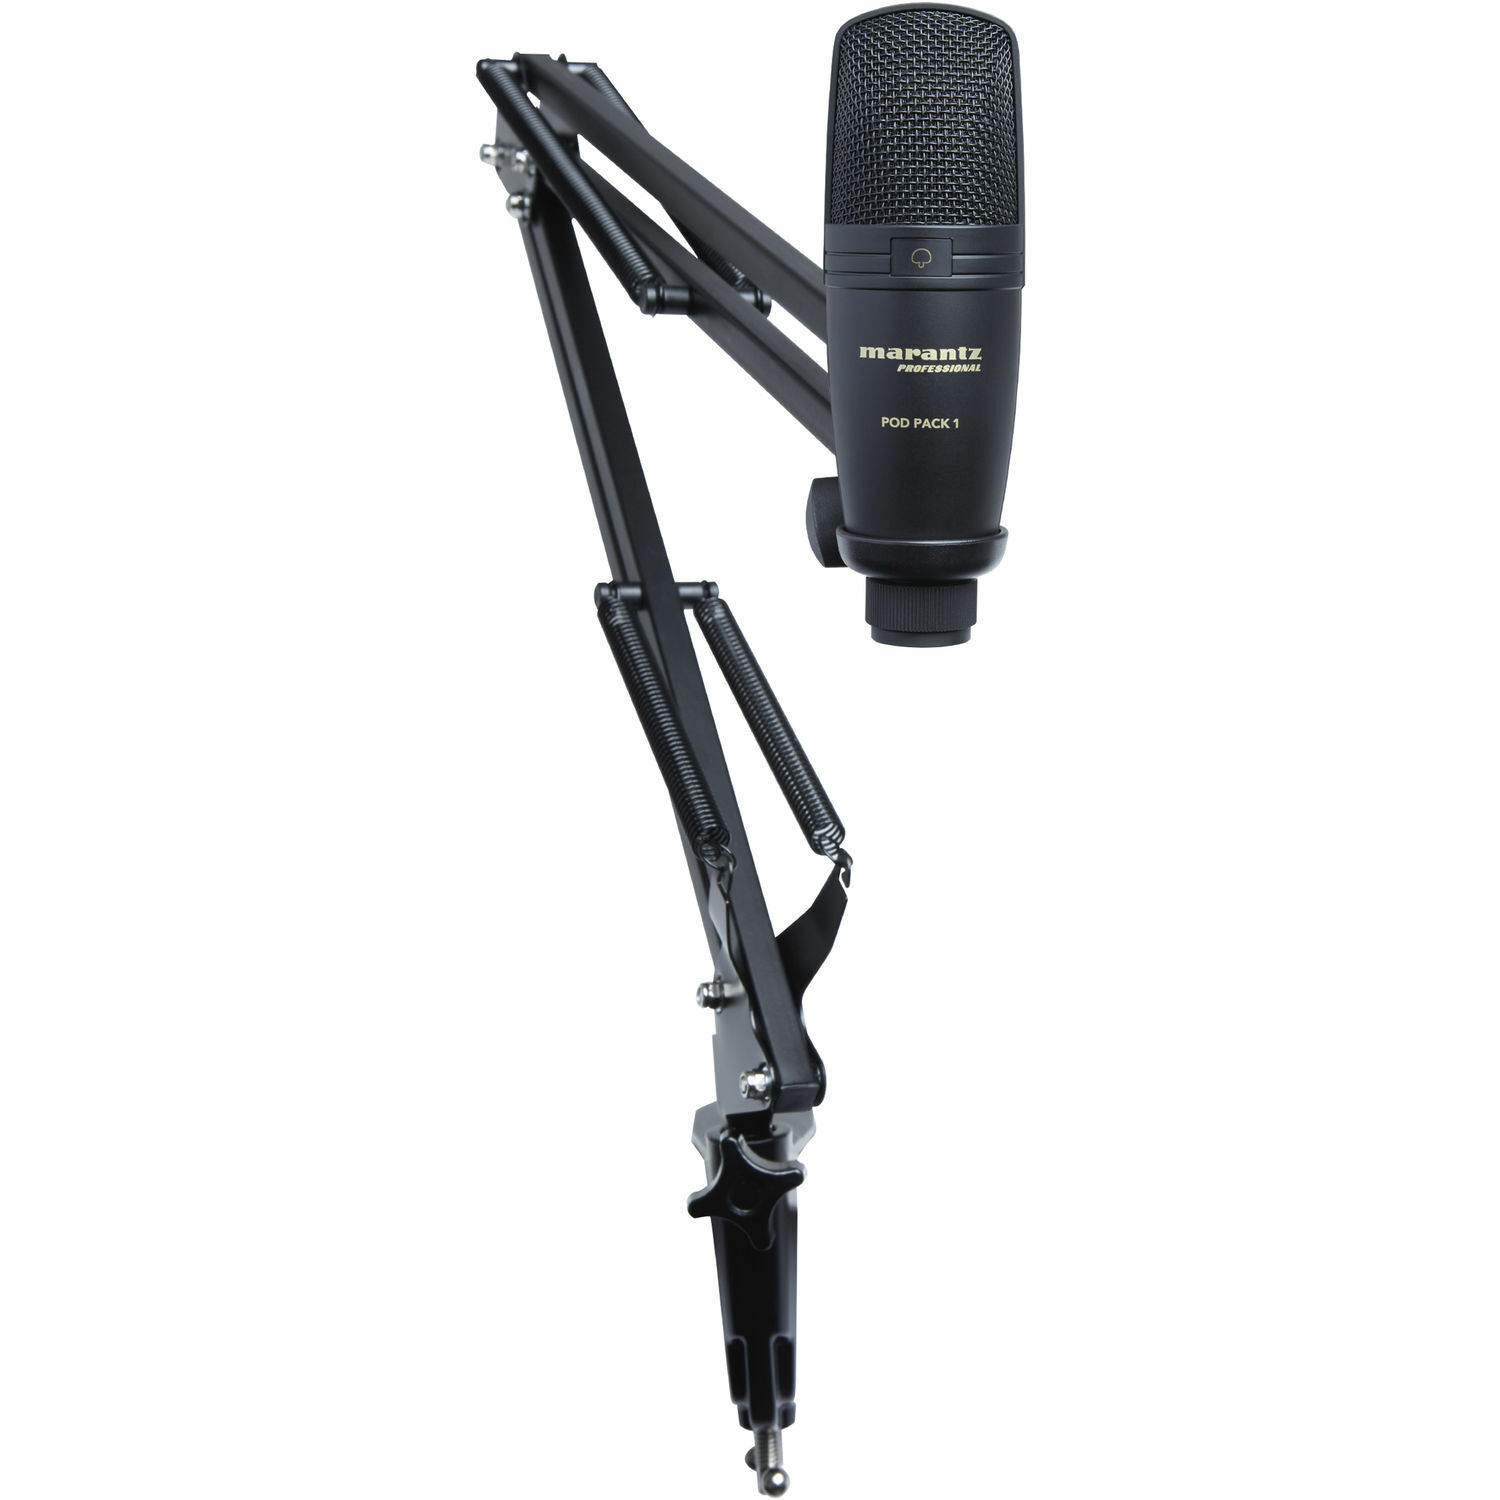 Marantz Professional Podcast Kit USB Microphone with Broadcast Stand Pod Pack 1